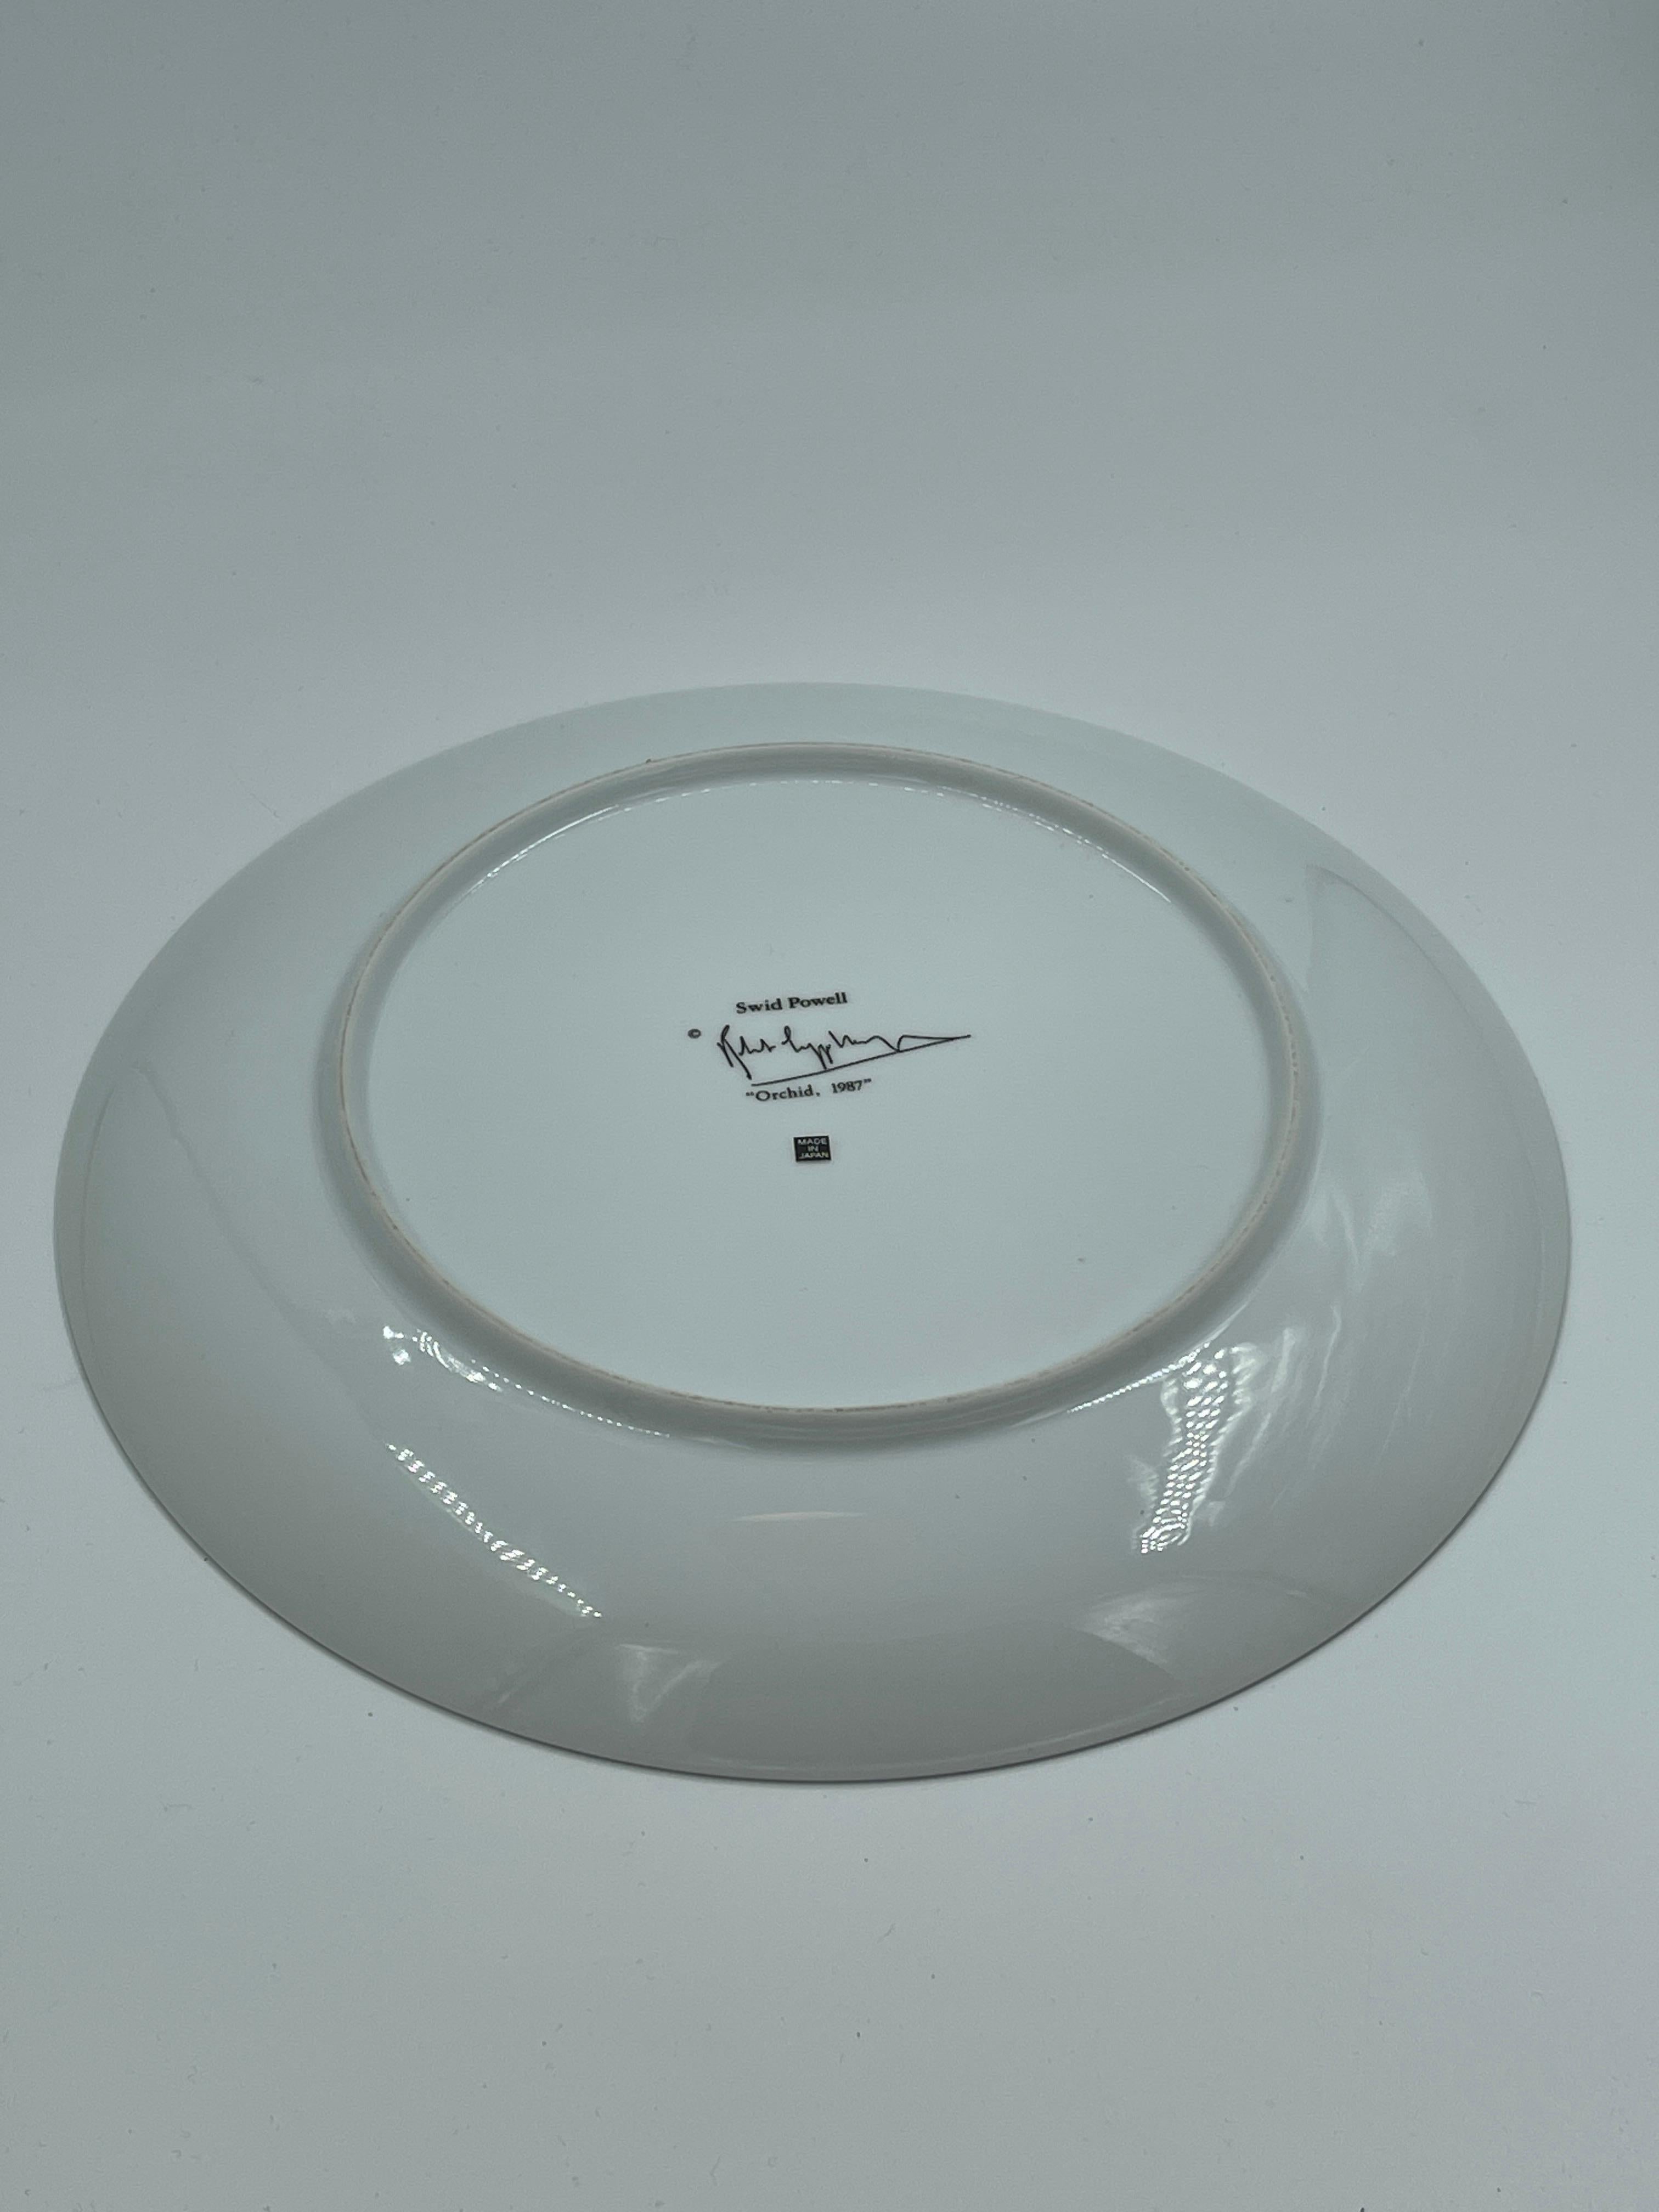 Late 20th Century Swid Powell - Robert Mapplethorpe Porcelain Plates, Orchid - Flower - Calla Lily For Sale